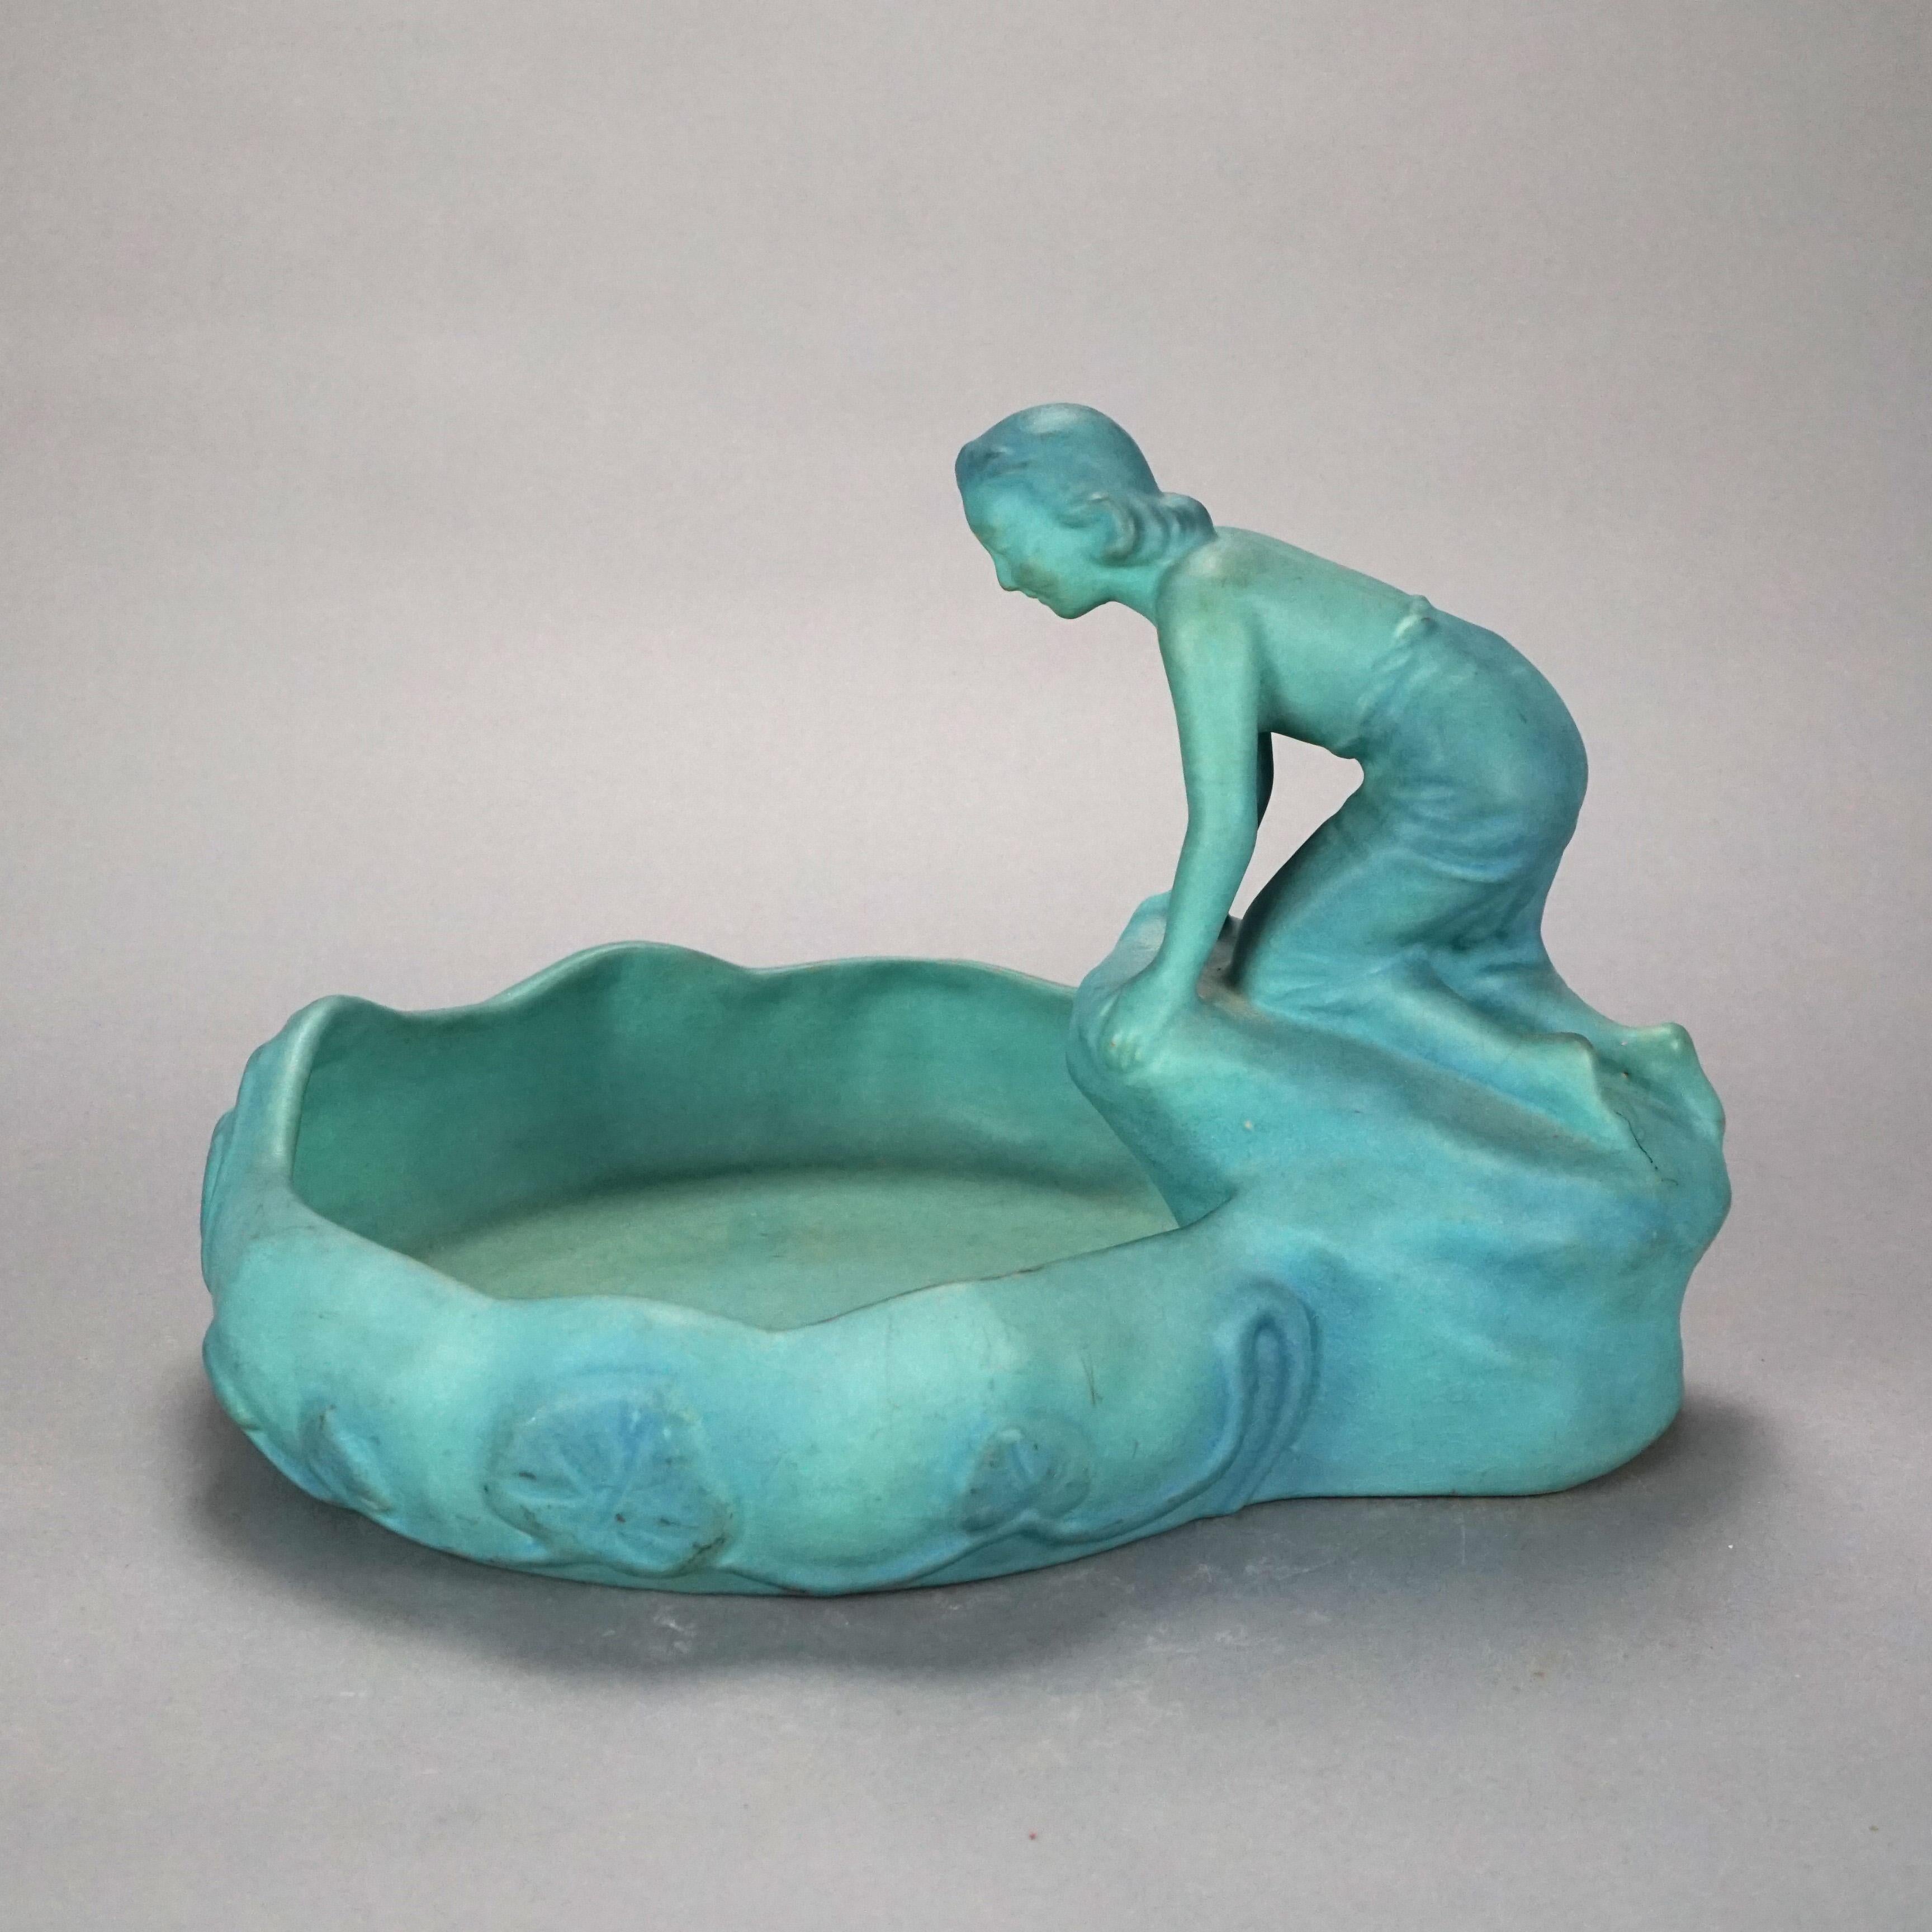 An antique Arts and Crafts figural Lady of the Lake dish by Van Briggle offers art pottery construction with young woman lakeside, maker mark on base as photographed, c1920

Measures- 10.25''H x 14.75''W x 12''D.